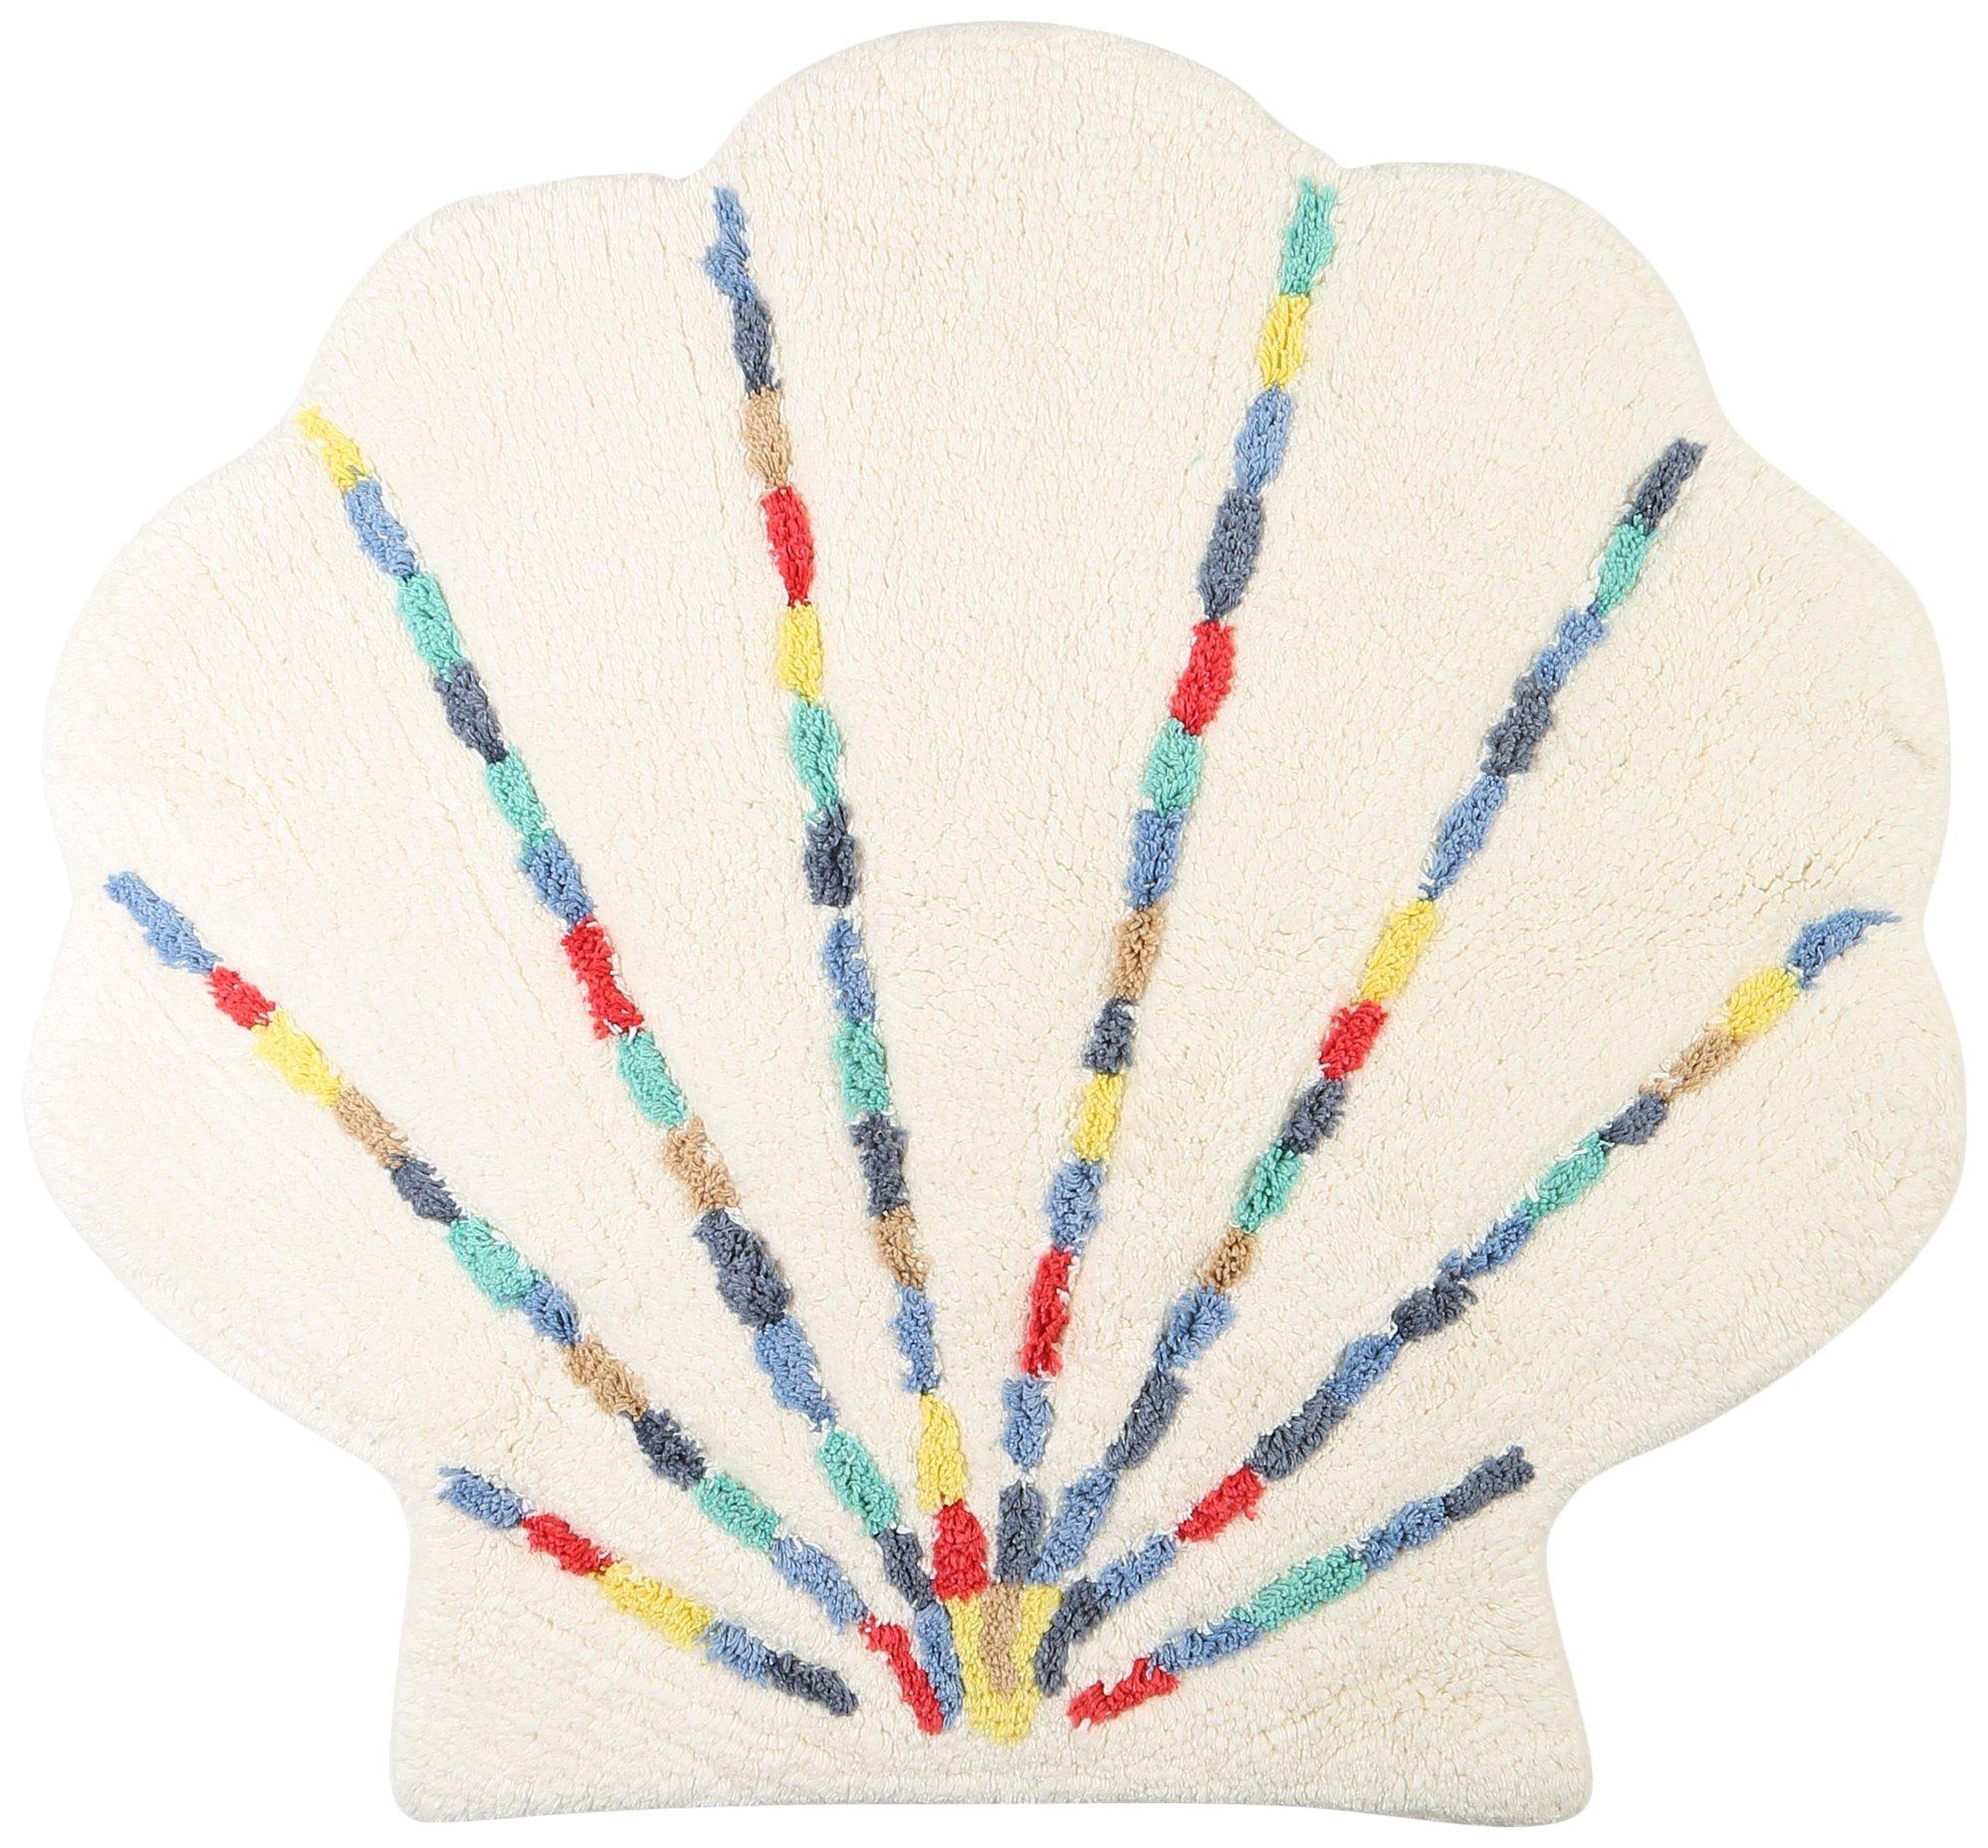 30x26 Happiness Comes in Waves Bath Rug